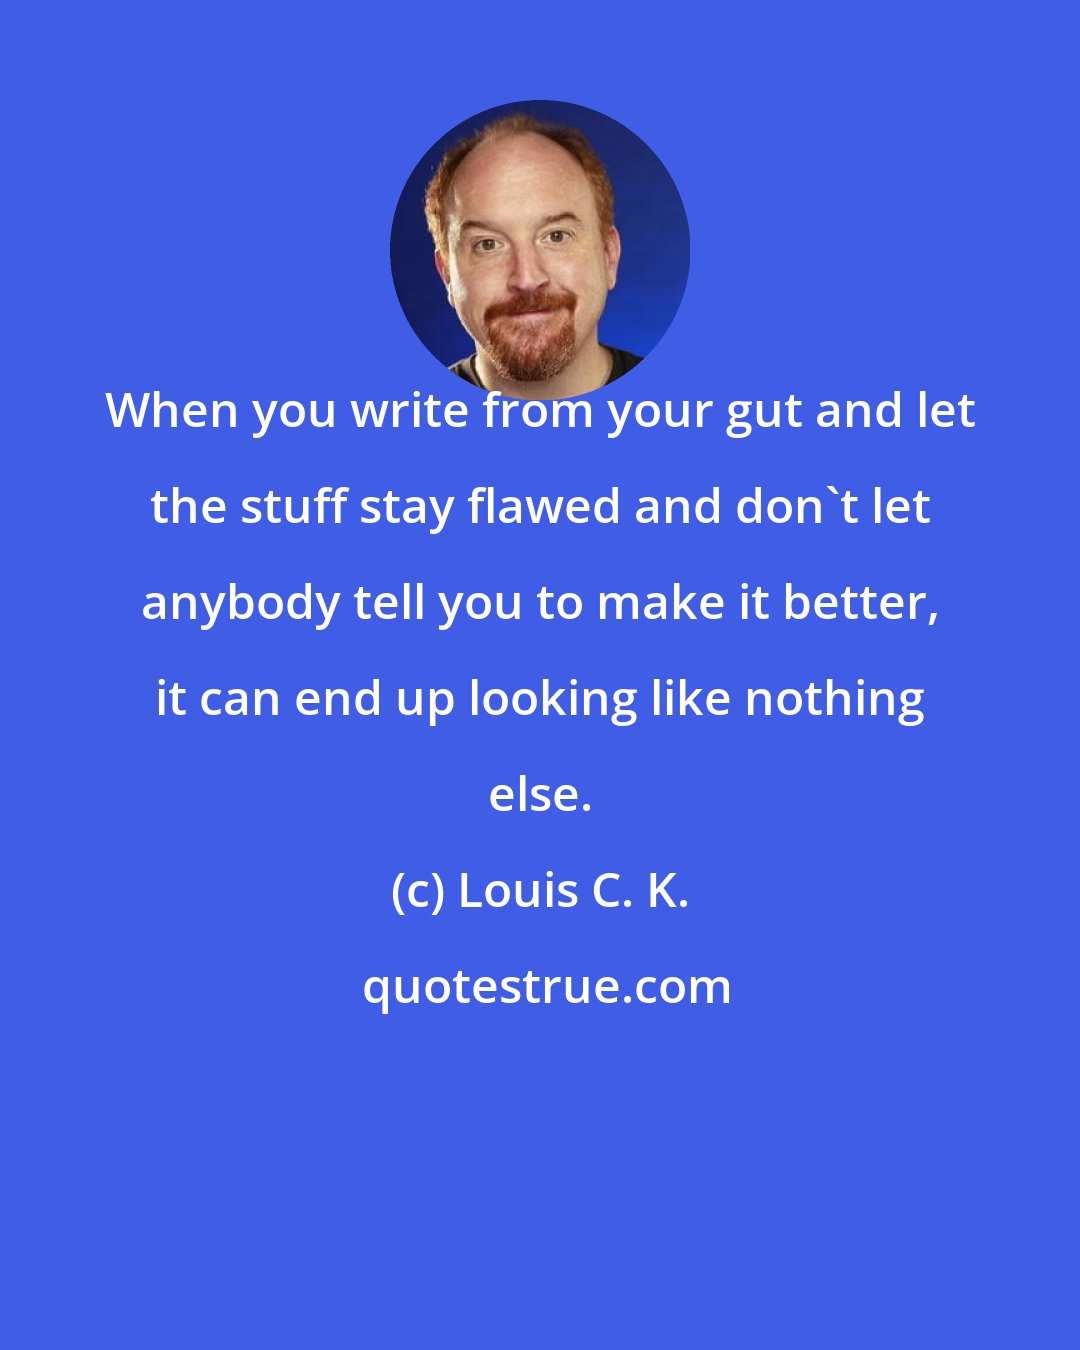 Louis C. K.: When you write from your gut and let the stuff stay flawed and don't let anybody tell you to make it better, it can end up looking like nothing else.